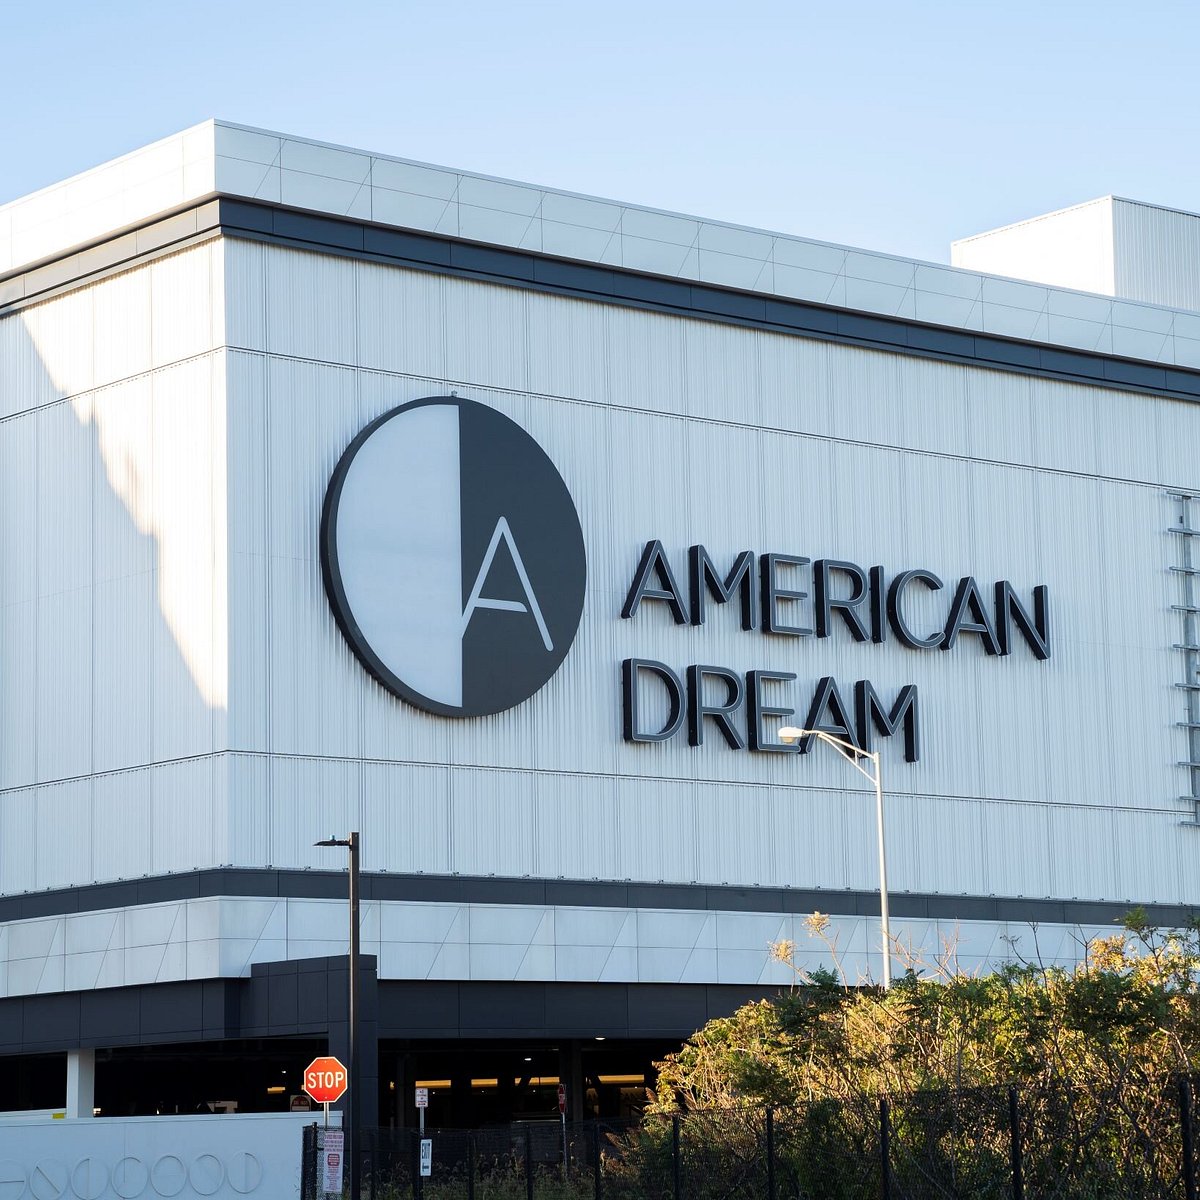 LUXURY SHOPPING & MORE AT THE AMERICAN DREAM MALL